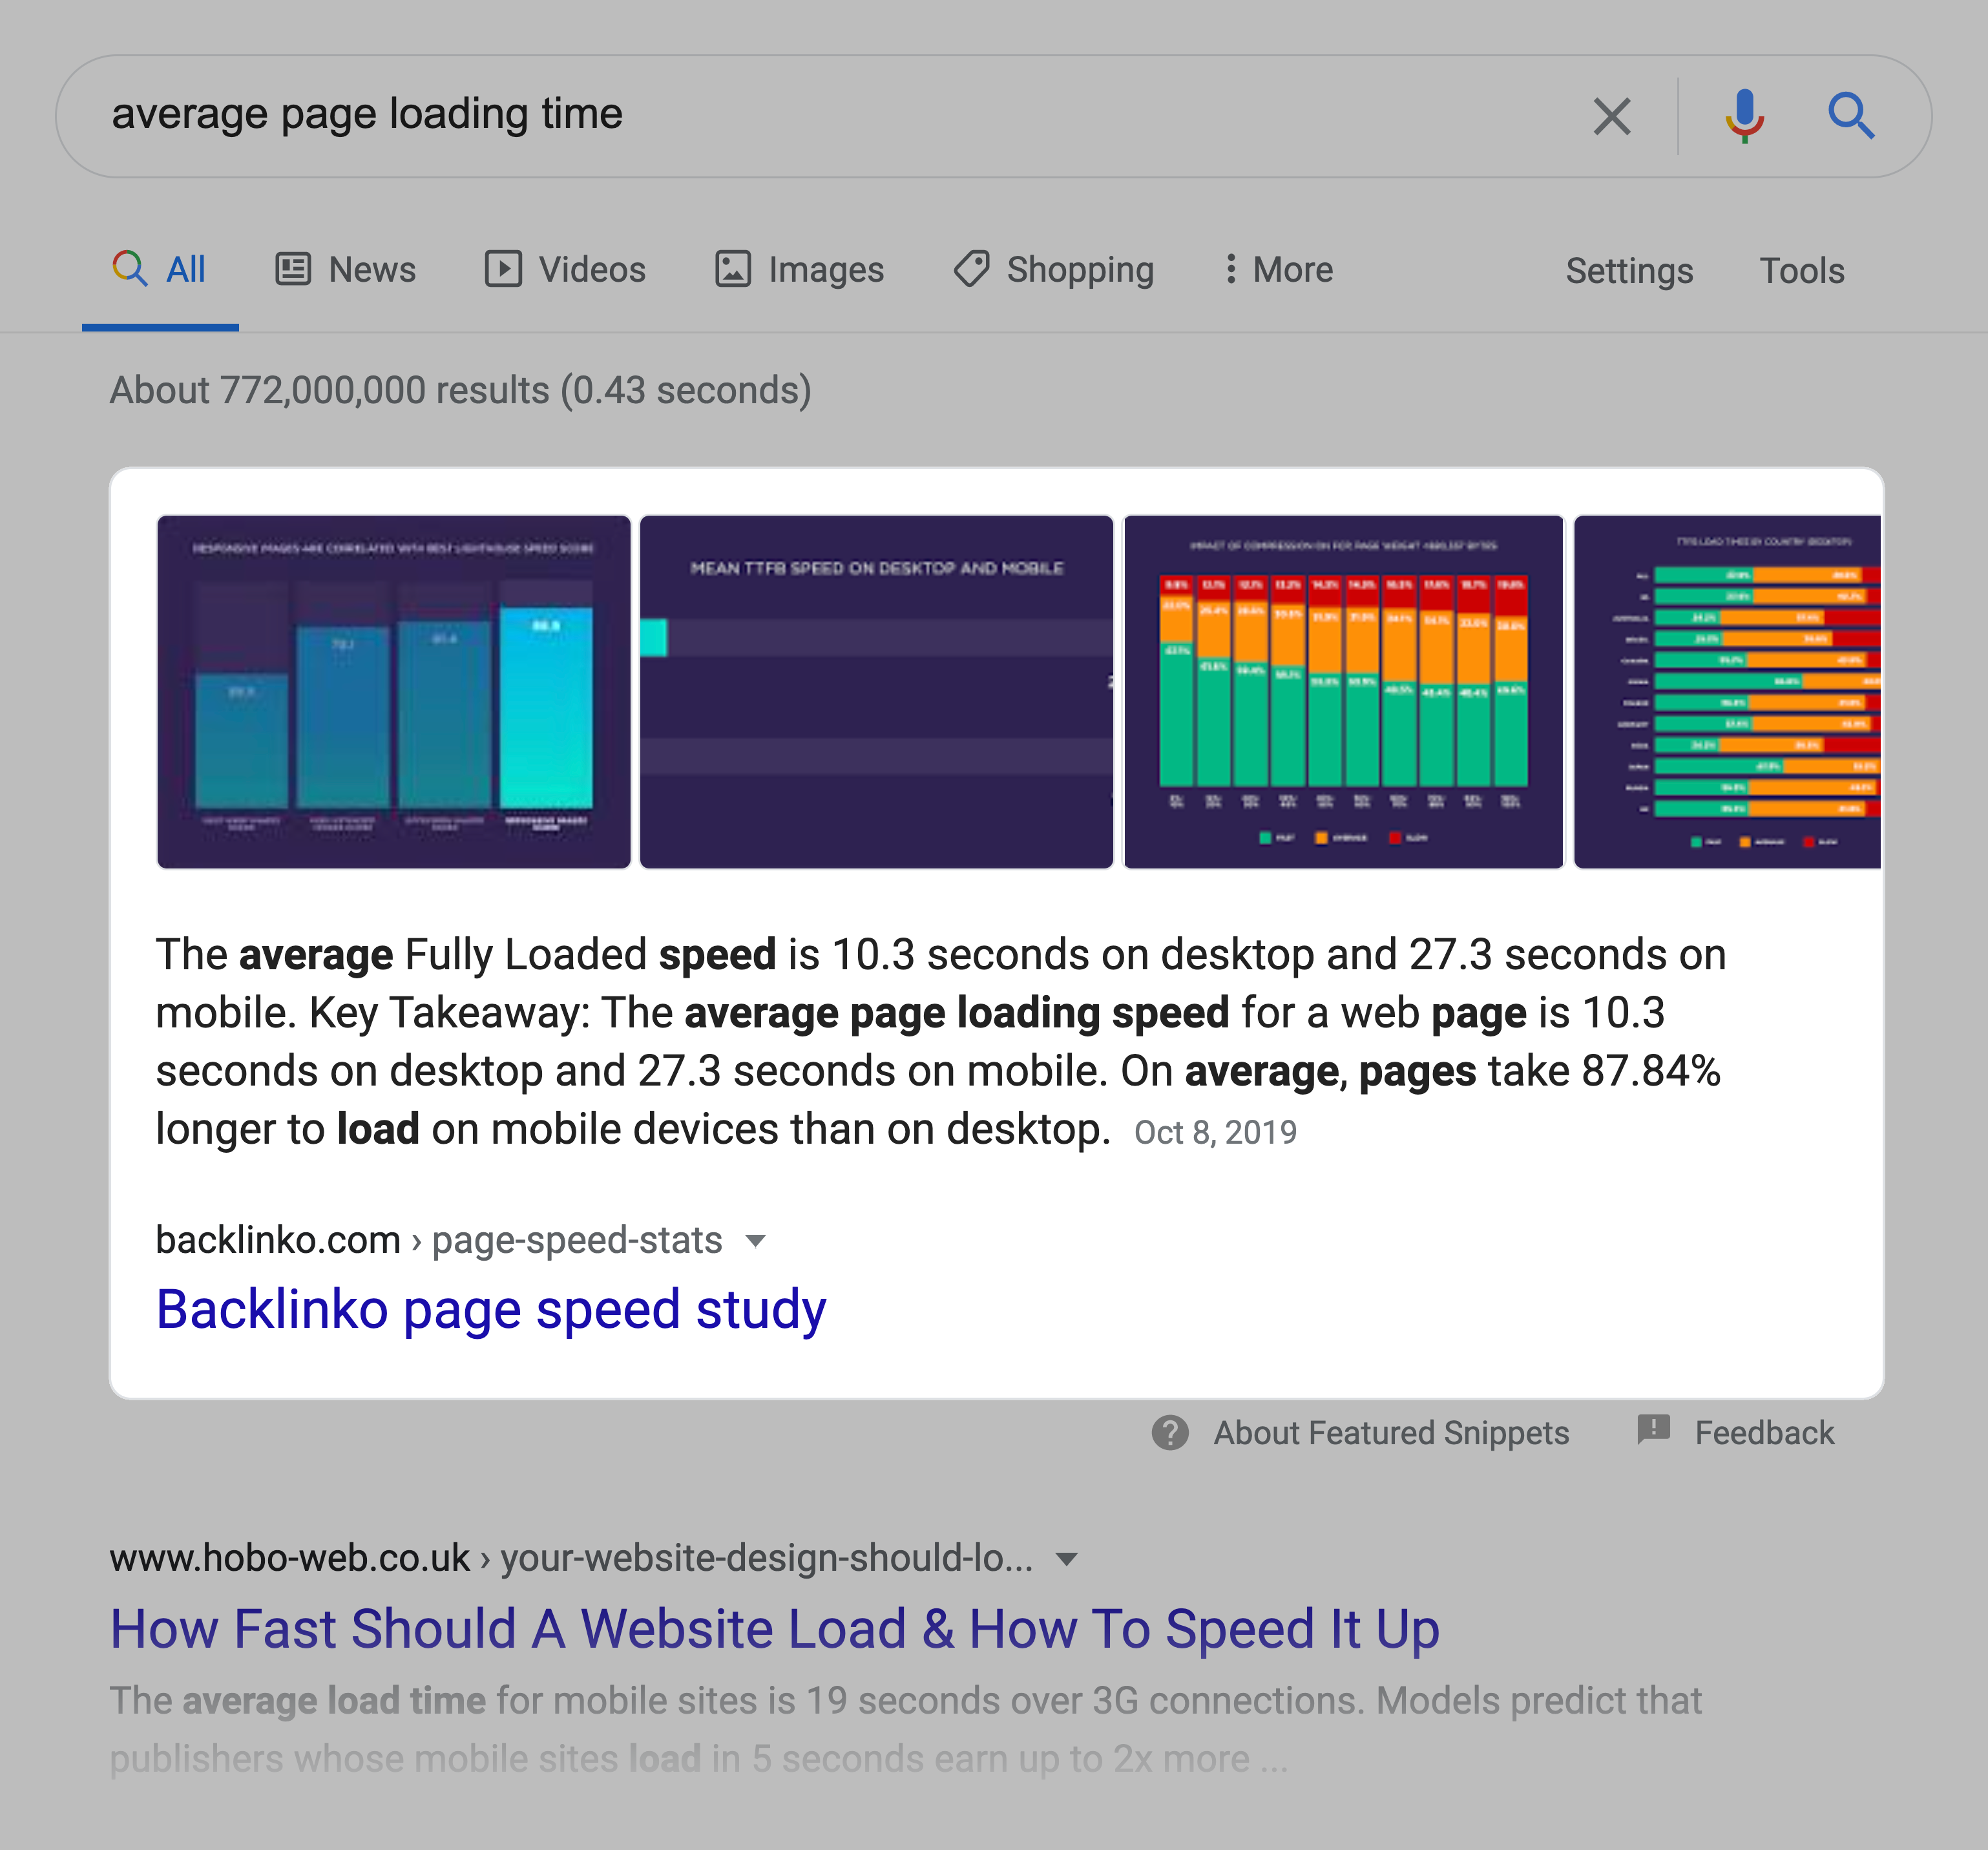 Average page loading time – SERPs